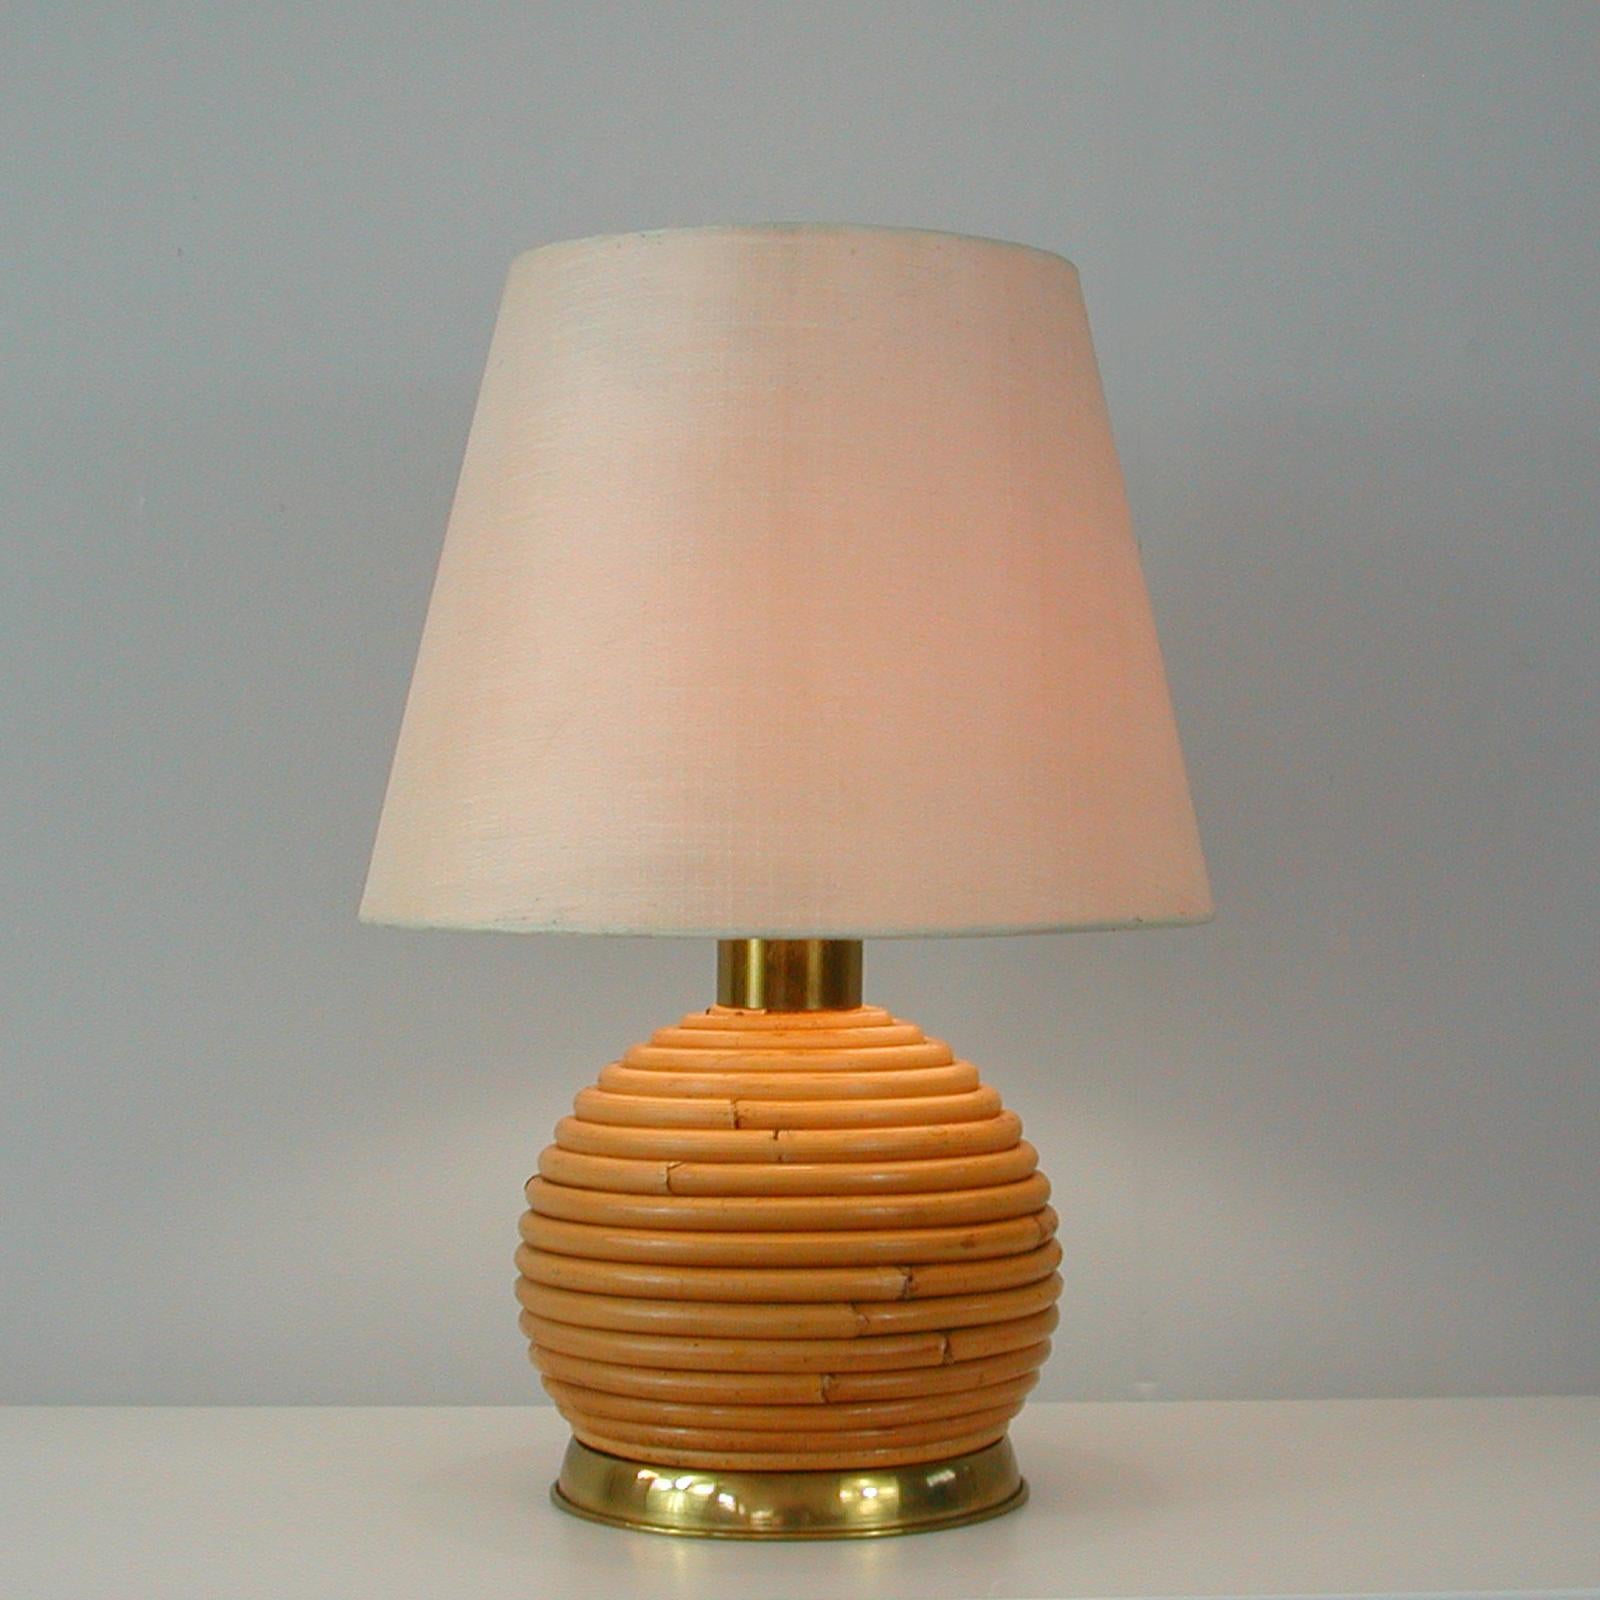 Swedish Midcentury Wicker and Brass Globe Table Lamp, 1960s For Sale 6